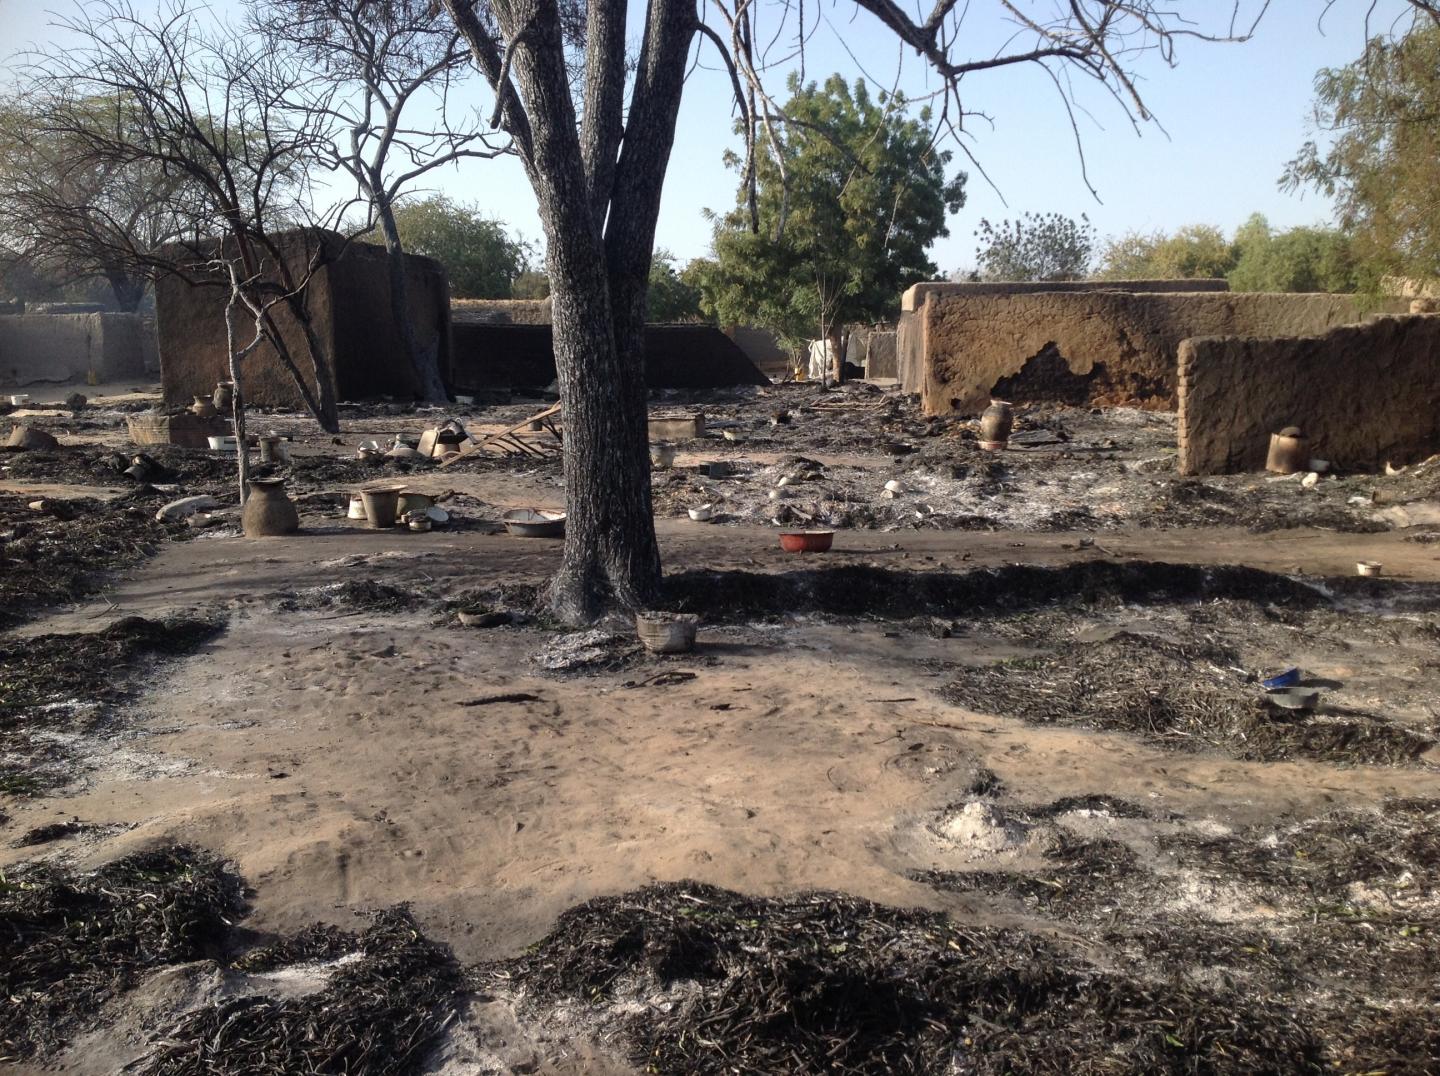 The village of Nougboua, Chad, is pictured following an attack by Boko Haram on February 13, 2015. Kubrrivu was another village attacked by the militant group in 2014 and it has just been burned down for a second time.